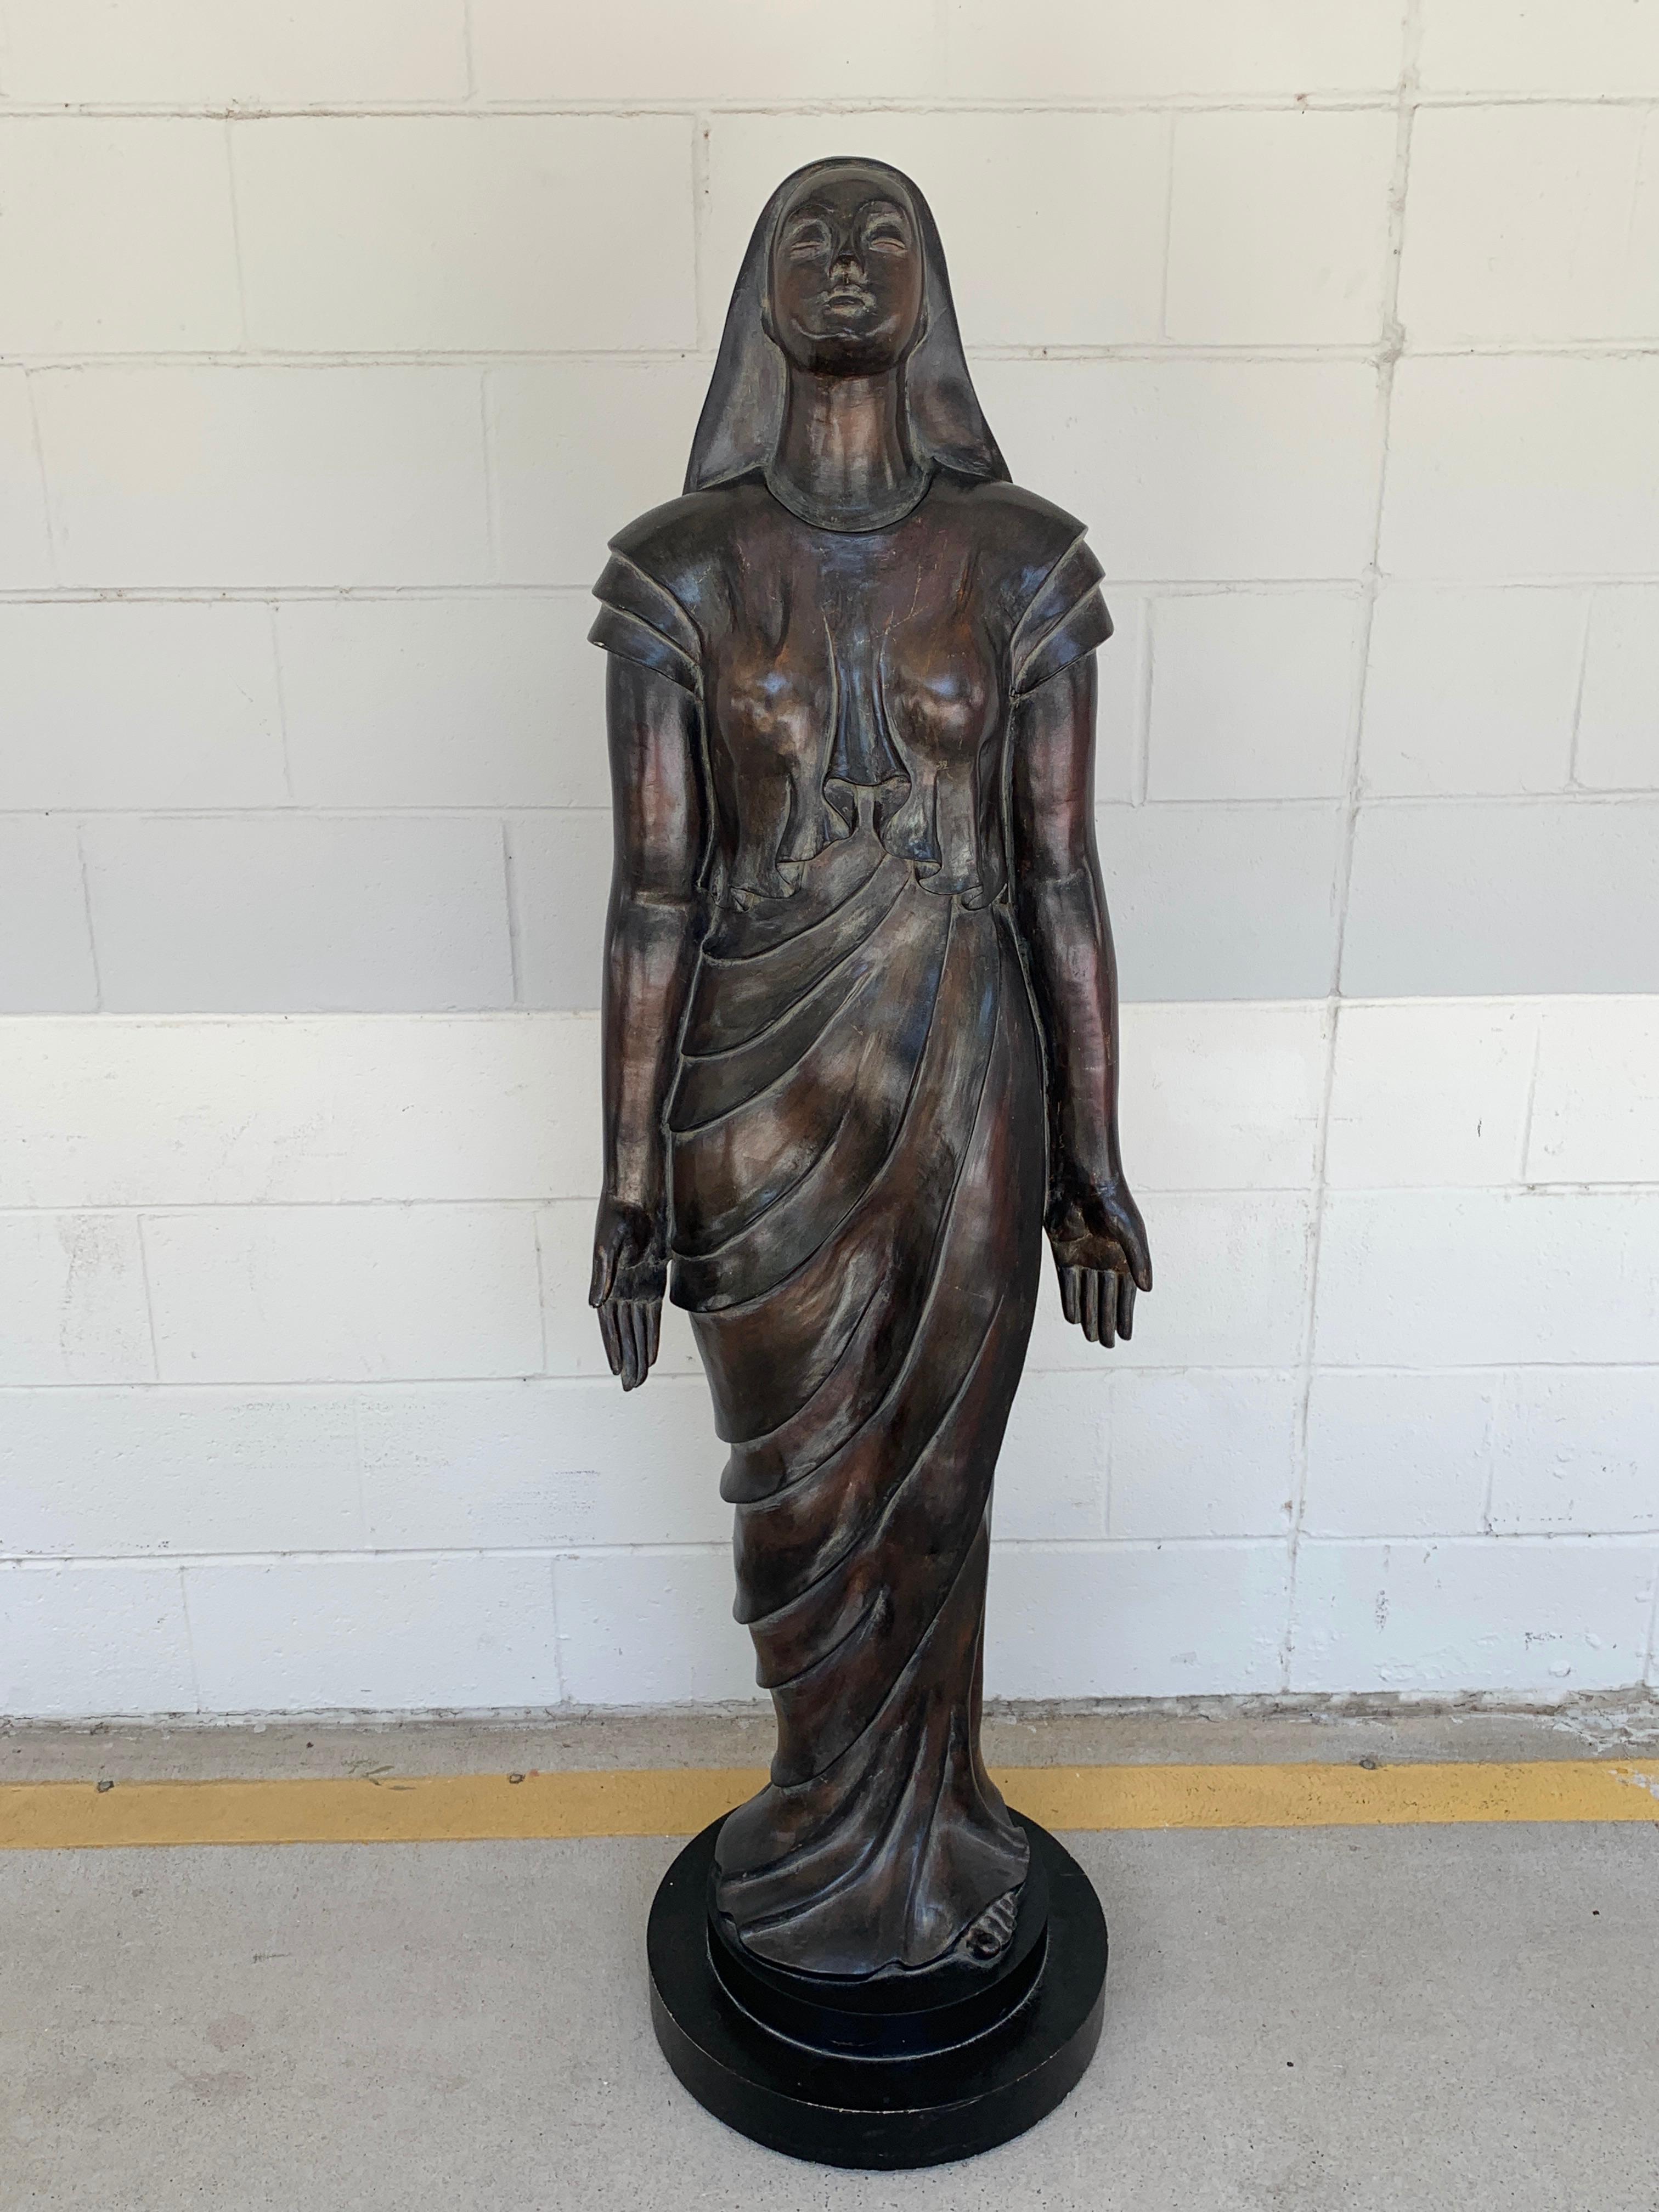 Vintage theatre standing modern draped statue, life-size
Raised on a 16